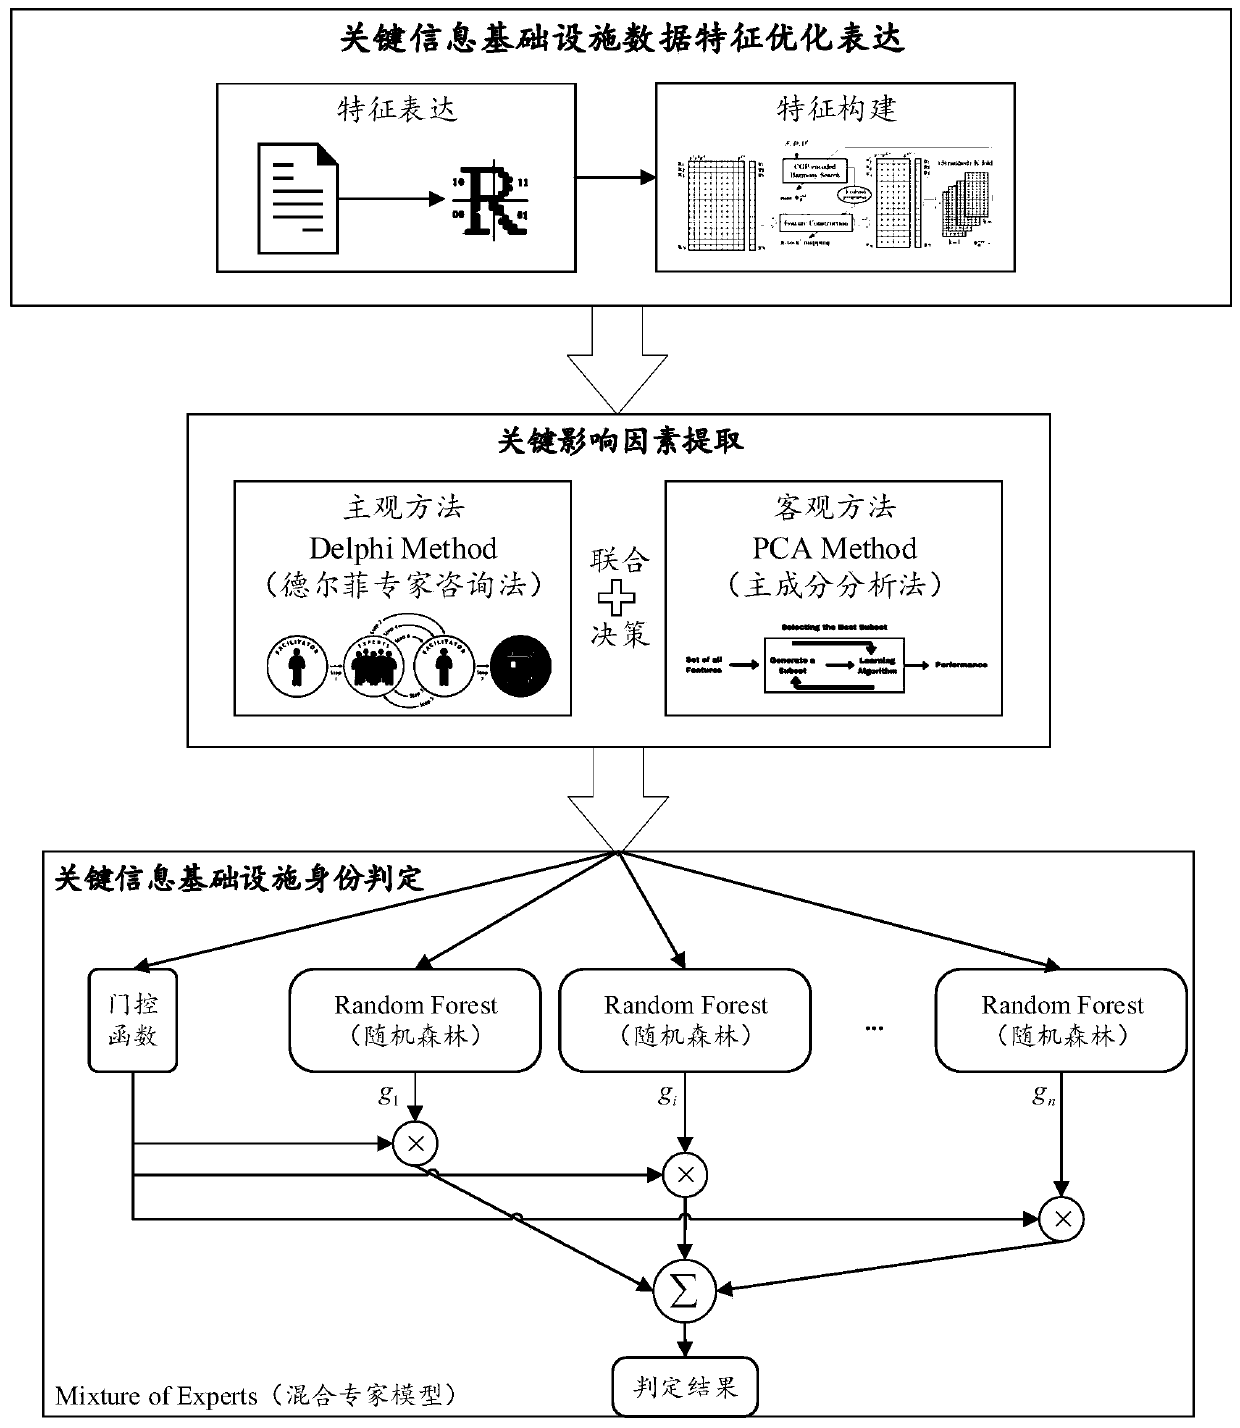 Key information infrastructure asset identification method combined with mixed random forest